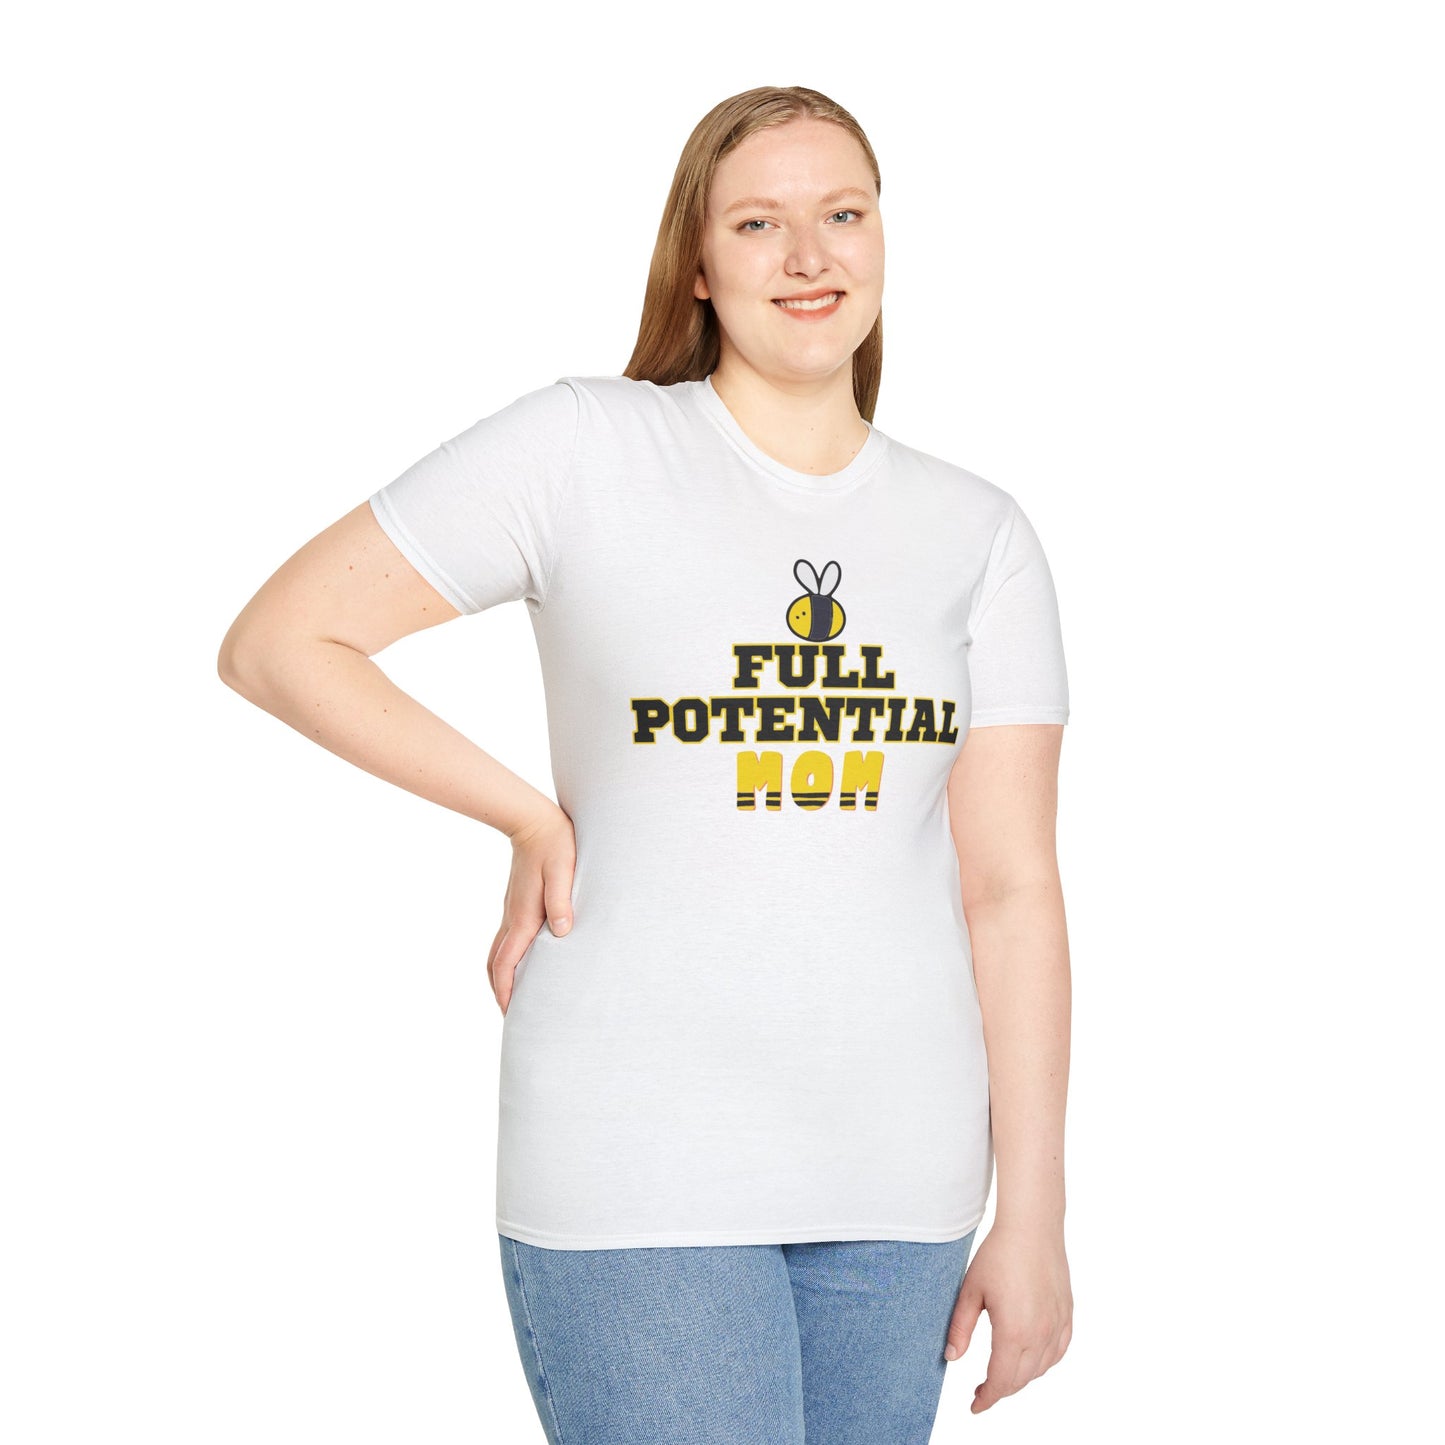 Full Potential Mom Bee v2 Unisex Softstyle T-Shirt